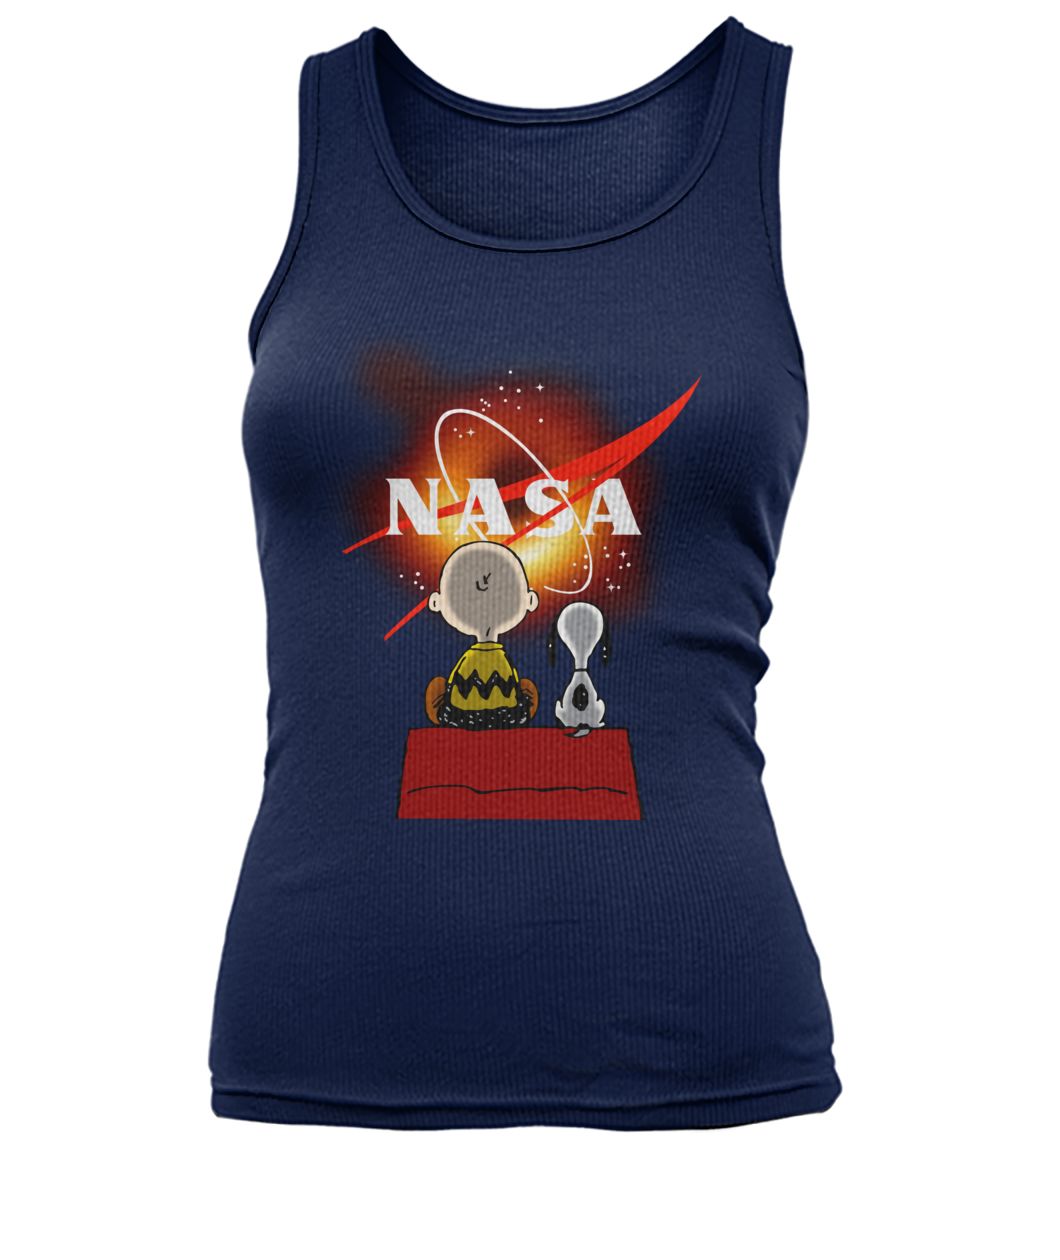 Snoopy and charlie brown black hole NASA women's tank top